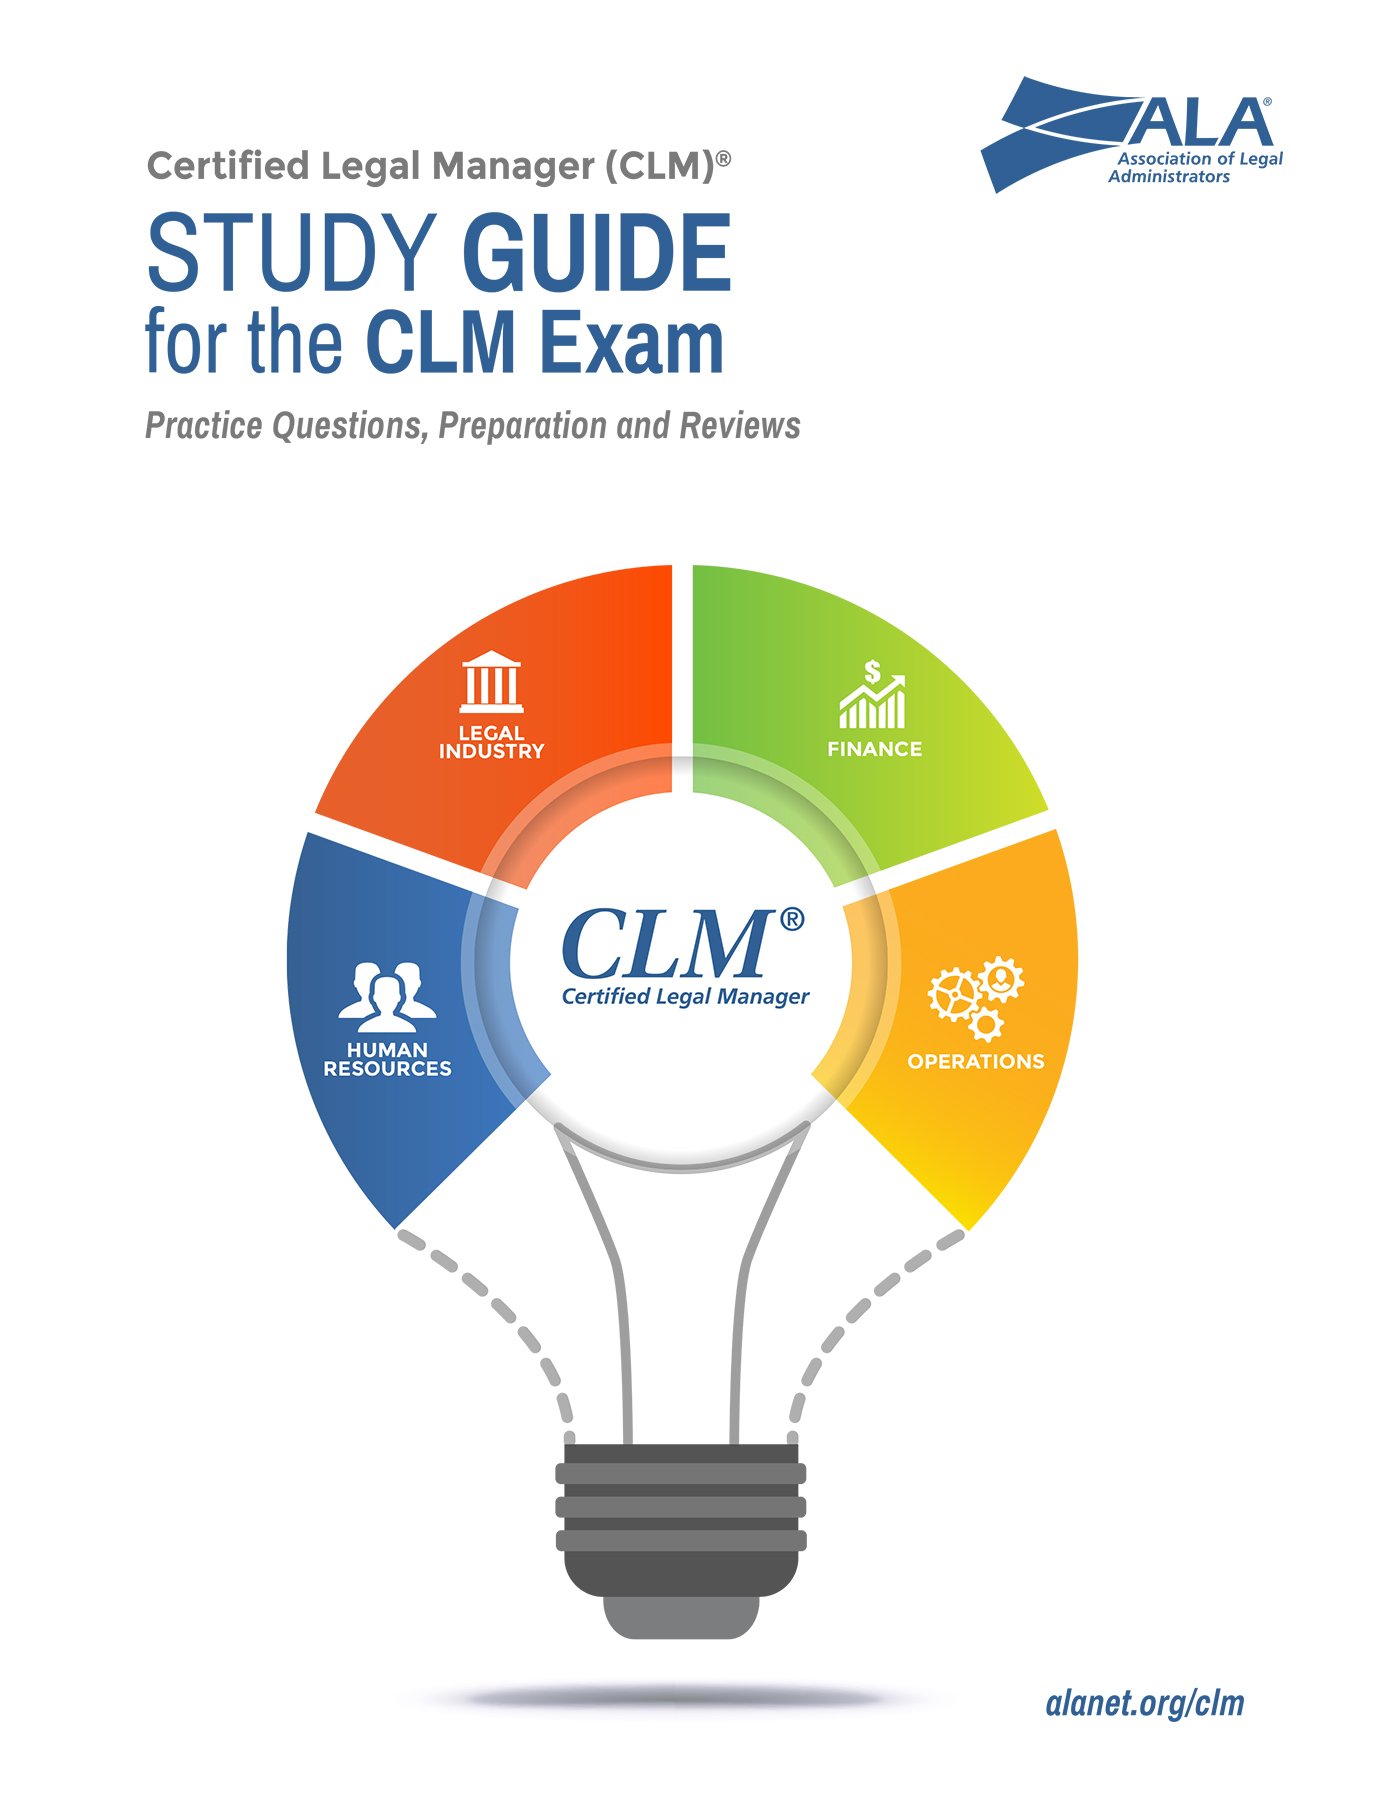 Study Guide for the CLM Exam Practice Questions, Preparation and Reviews